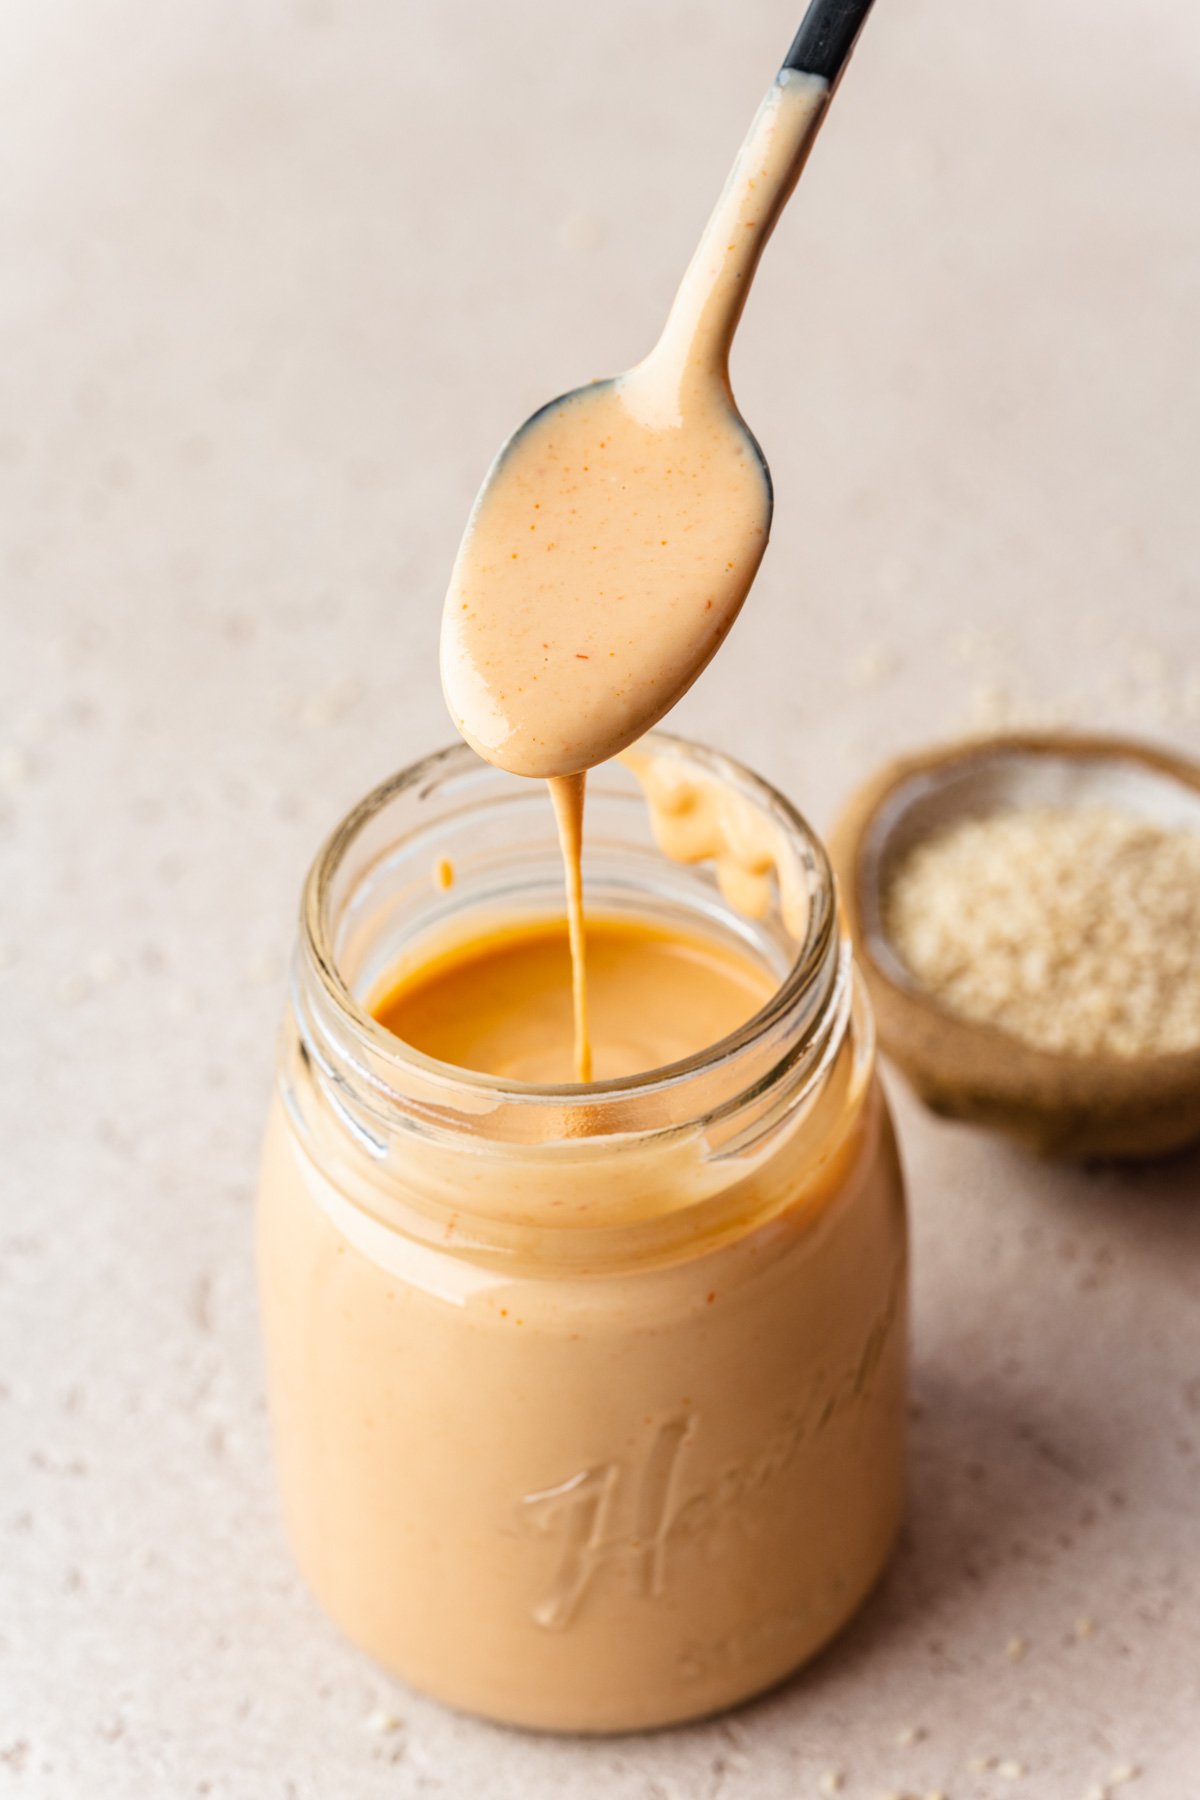 Spoon showing the texture of the spiced tahini dripping into a jar.